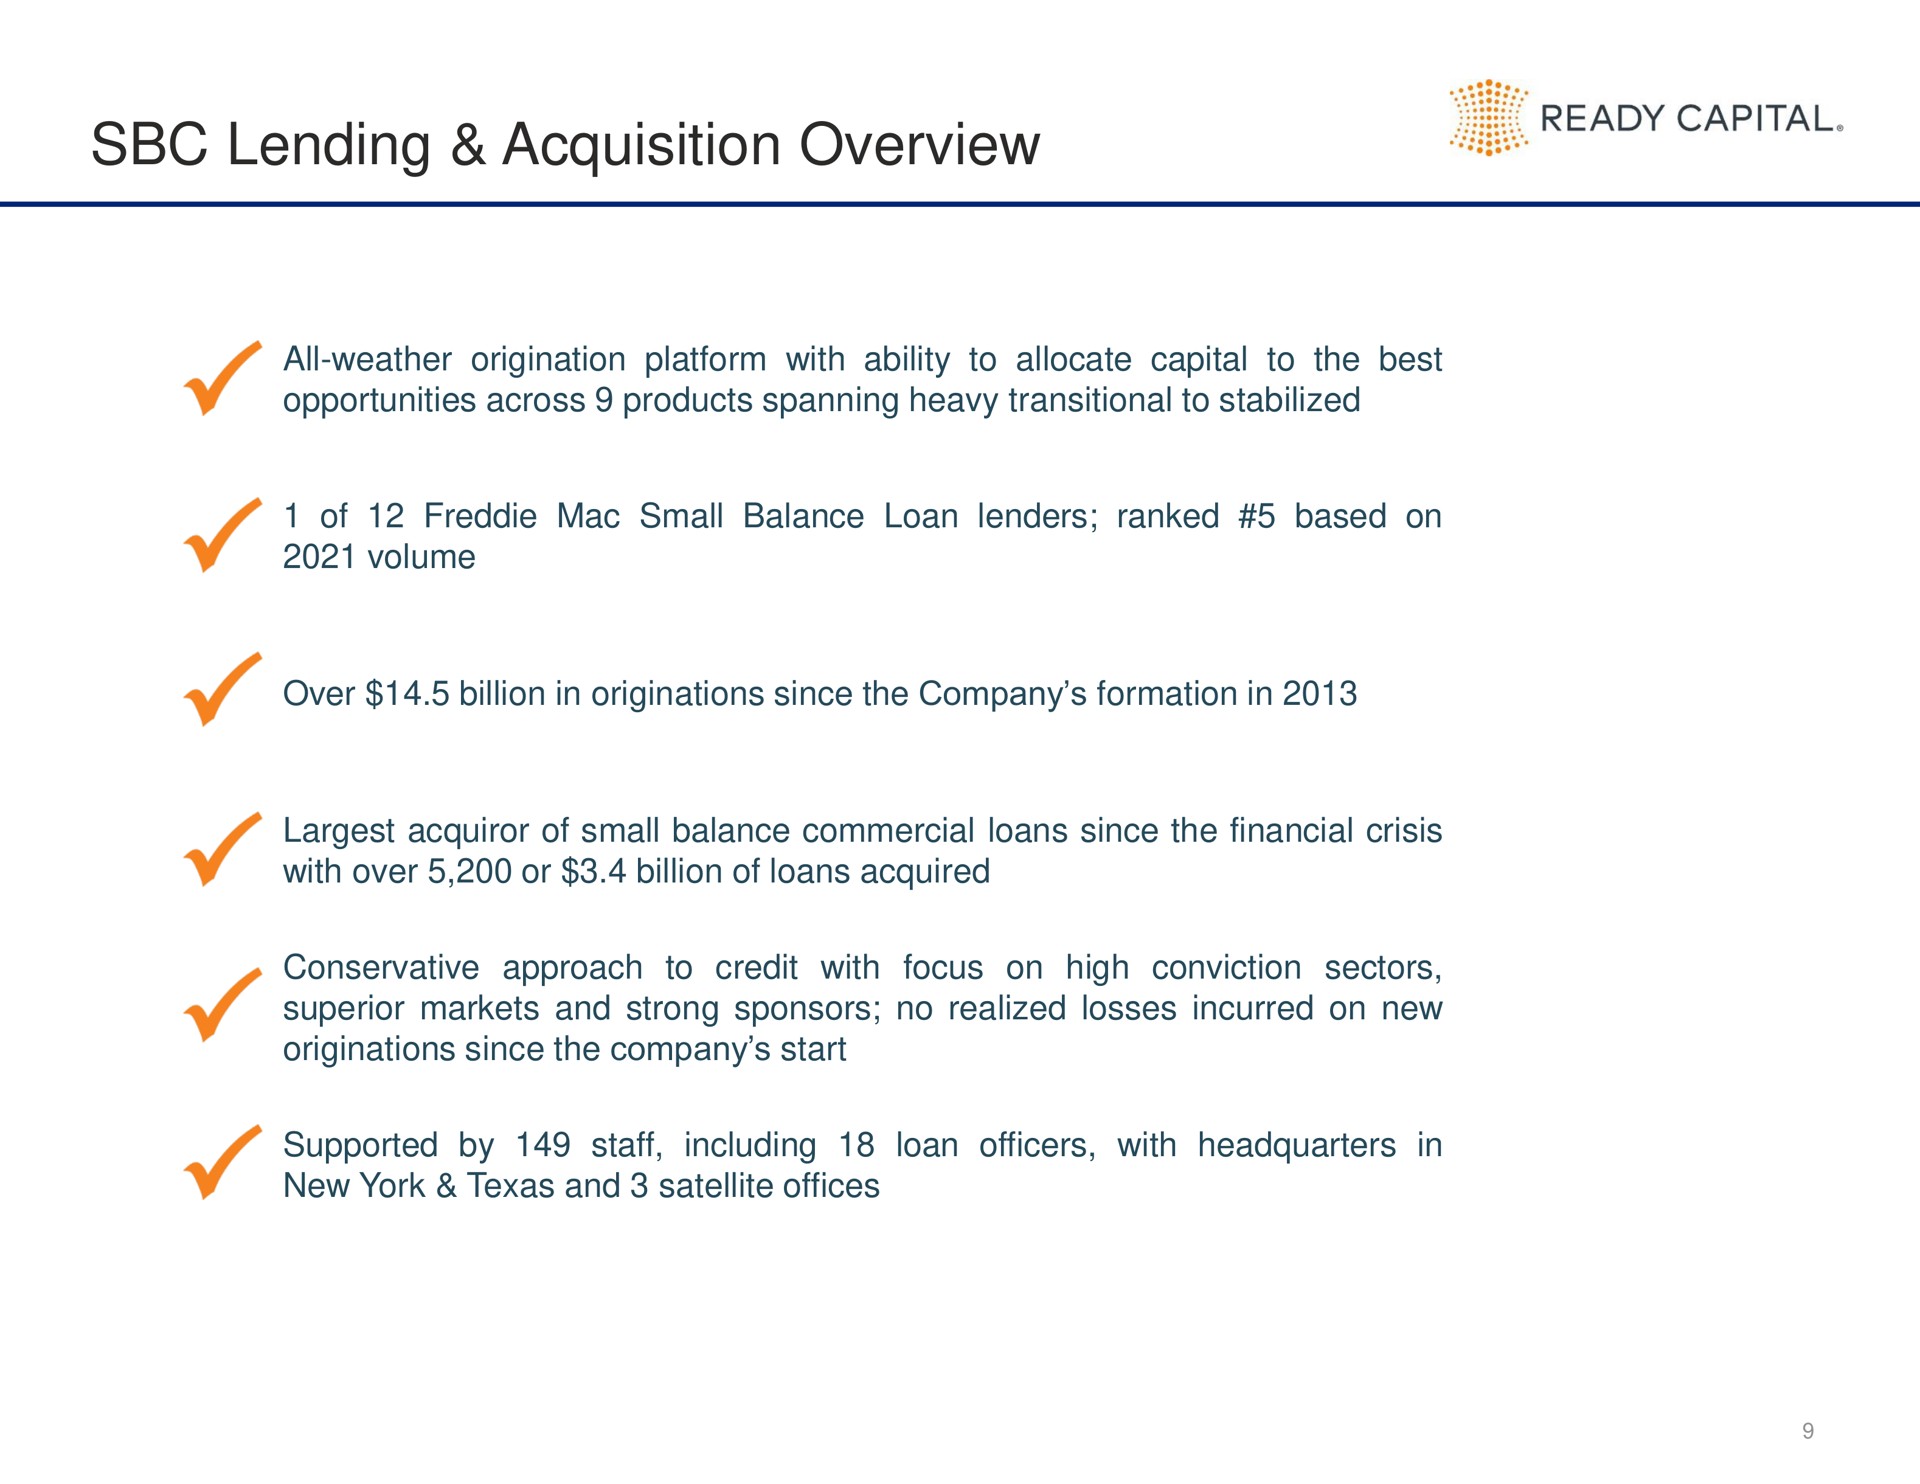 lending acquisition overview ready capital | Ready Capital